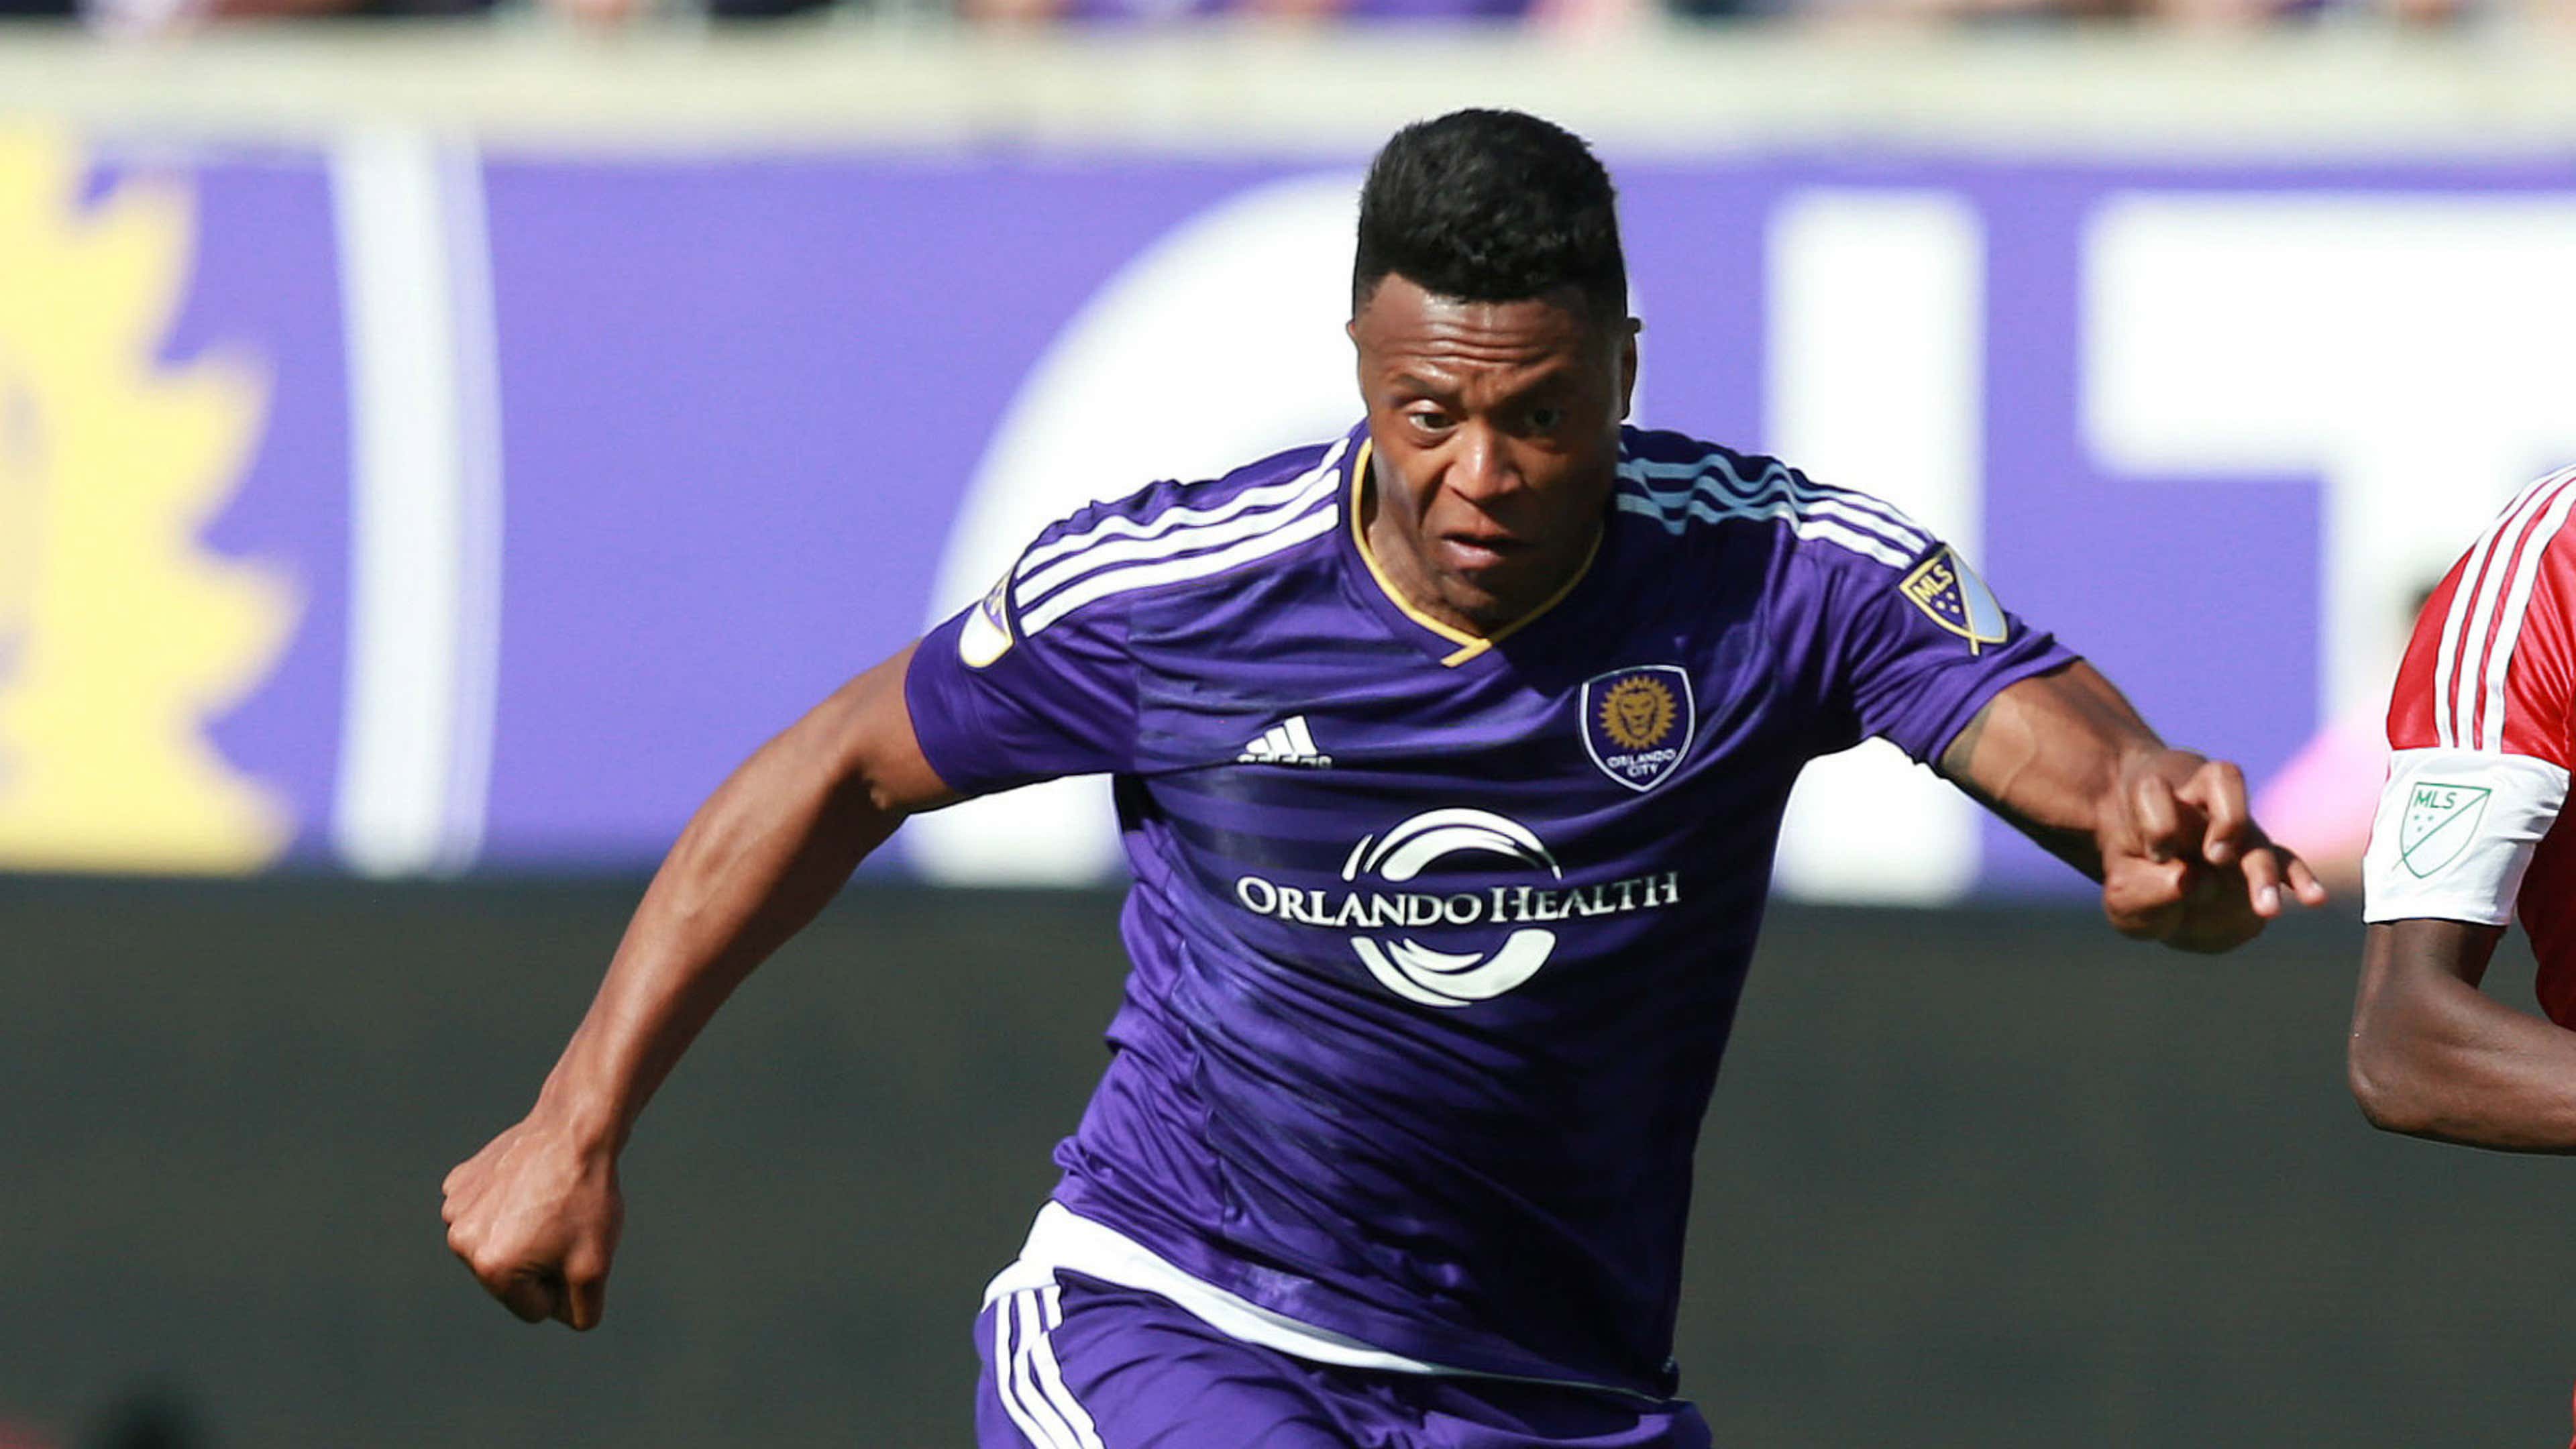 Julio Baptista is back on the prowl, and that's good news for Orlando